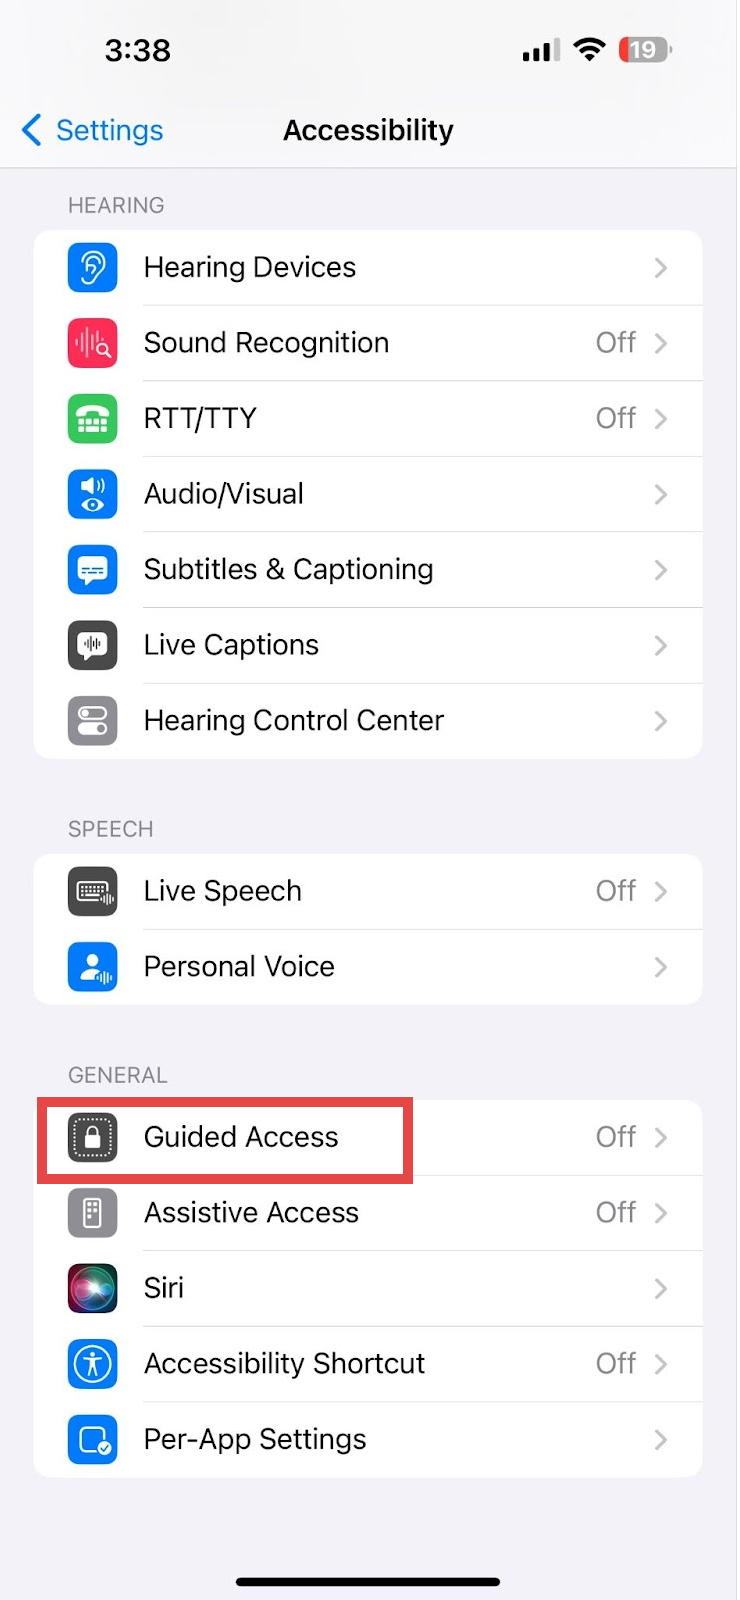 Once in Accessibility, scroll down to “Guided Access,” and select.